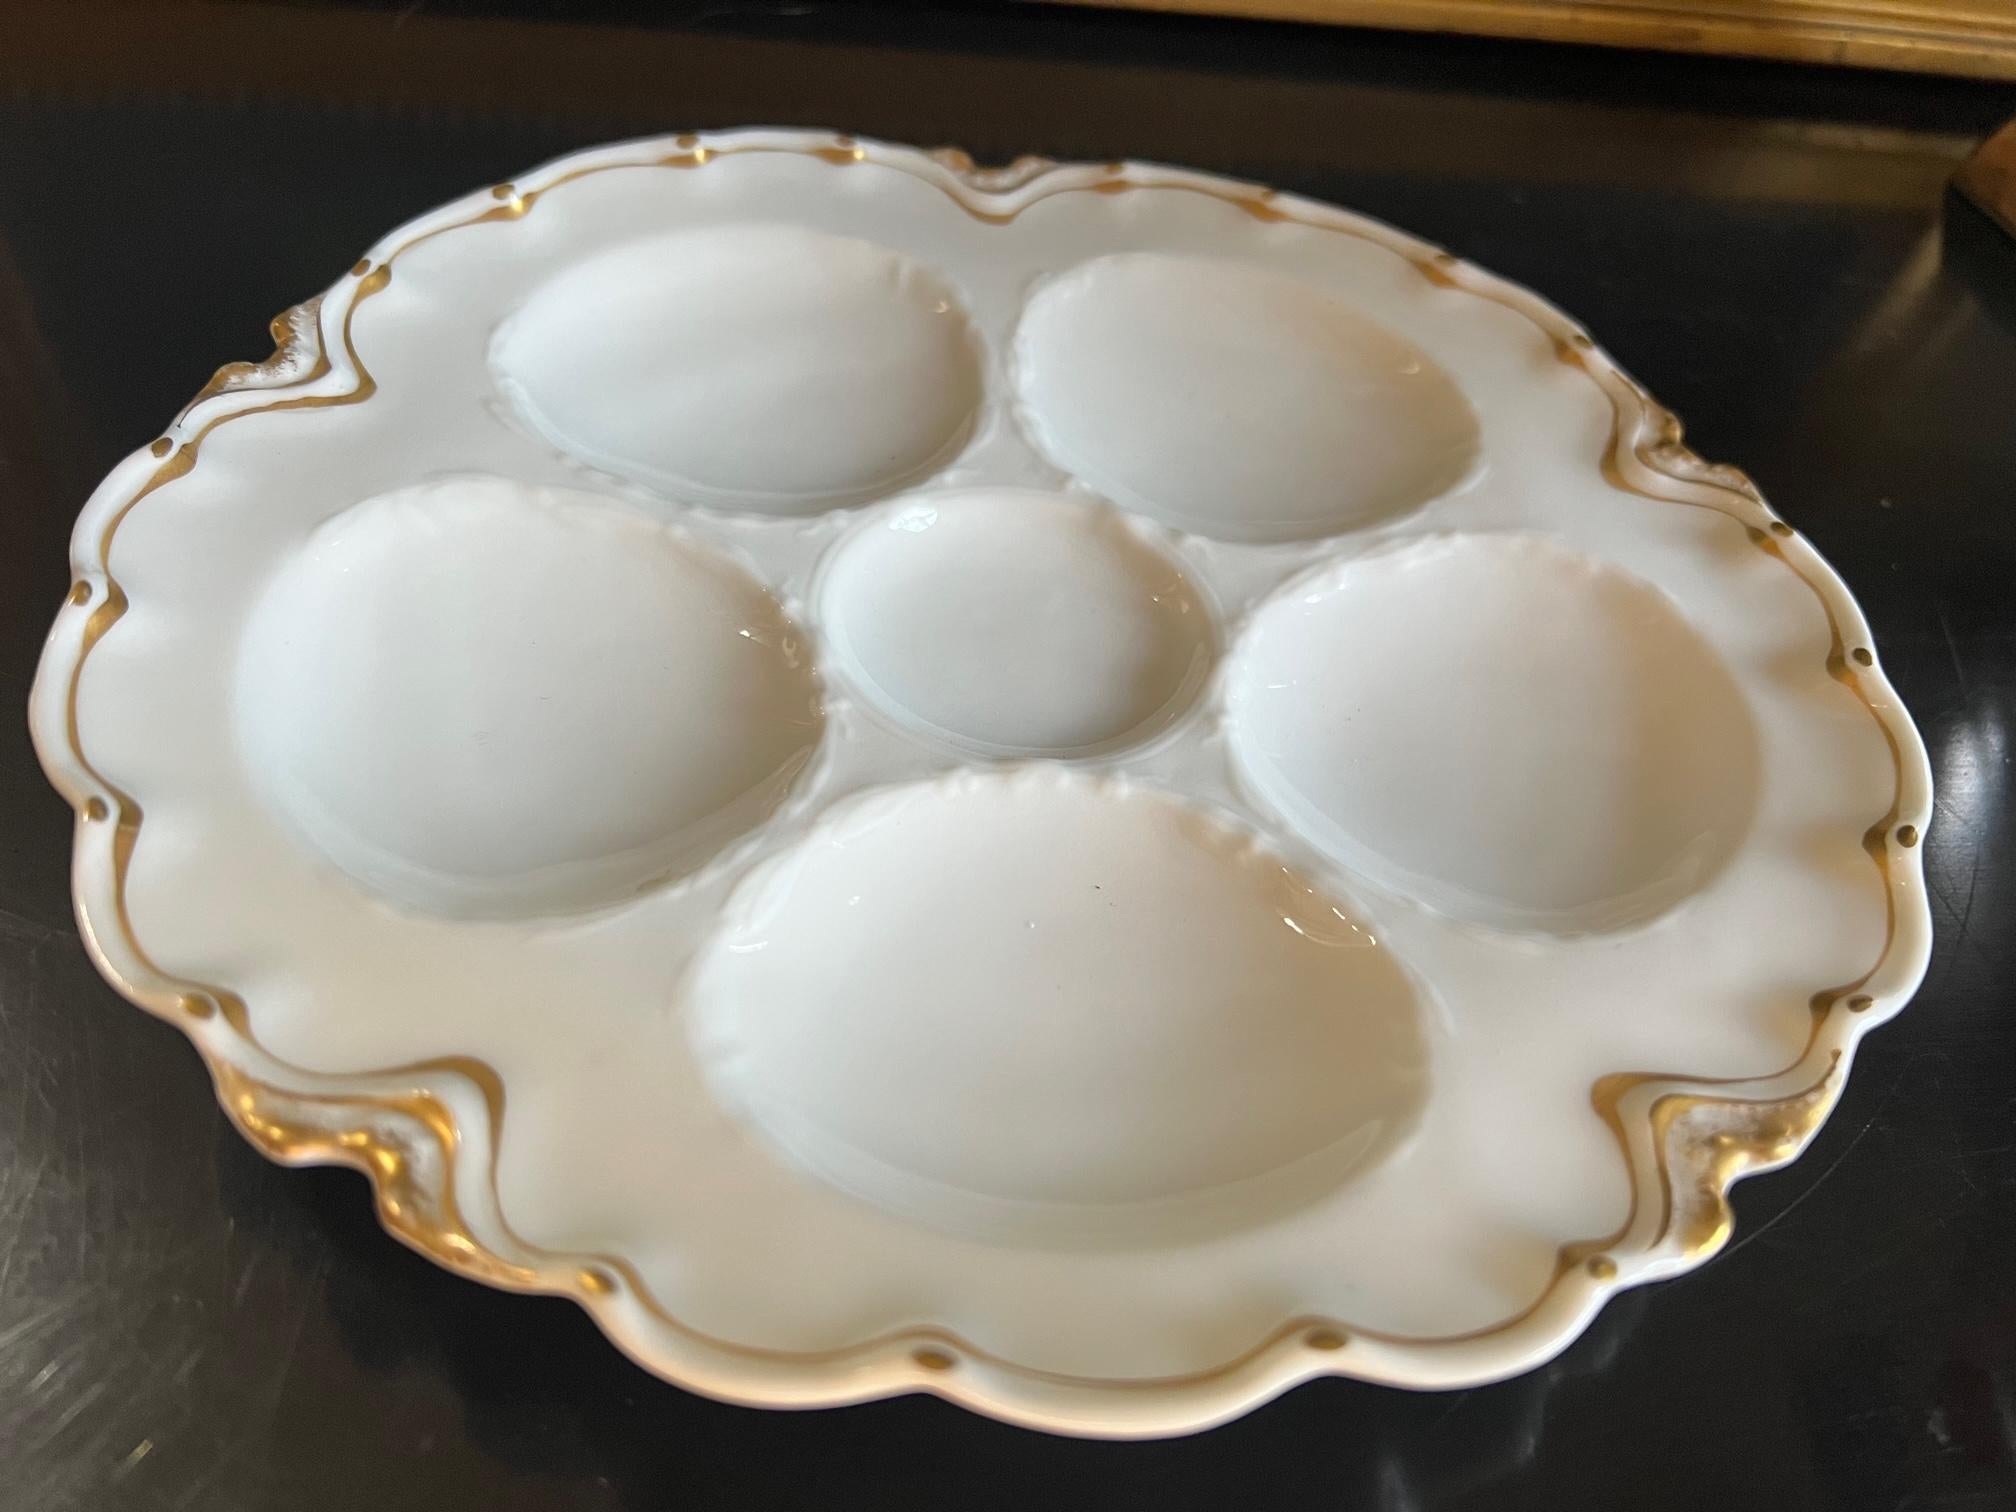 Porcelain Antique French Limoges Oyster Plate by Haviland & Co., circa 1920s